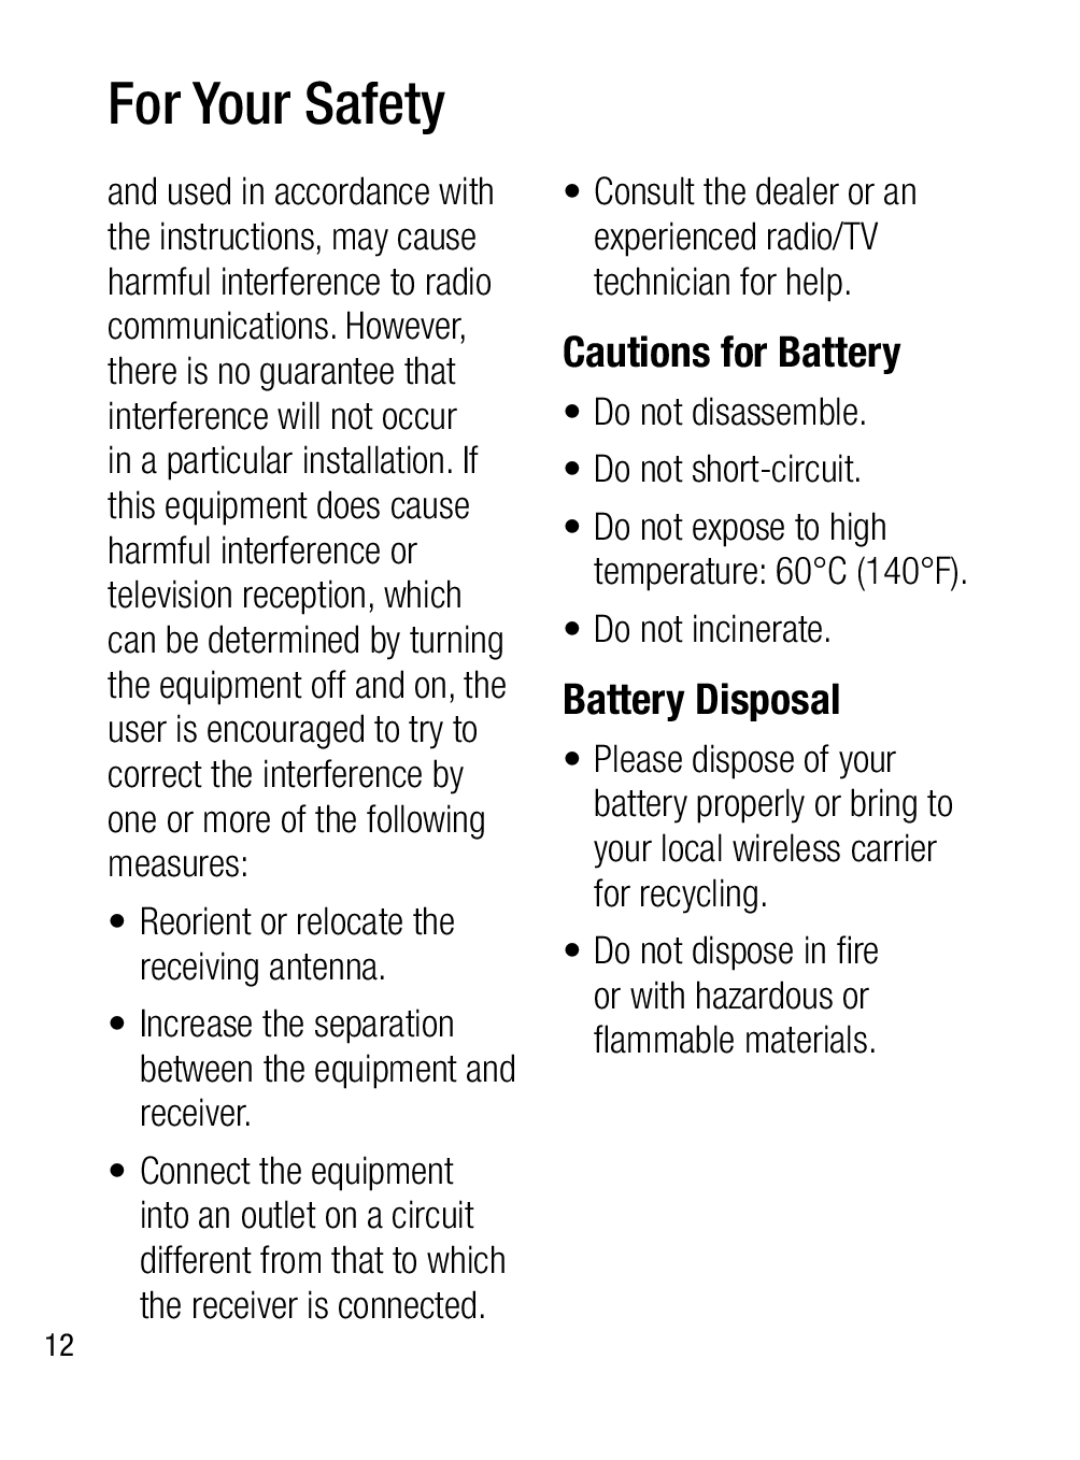 LG Electronics A133CH Cautions for Battery, Battery Disposal, Do not disassemble Do not short-circuit, Do not incinerate 